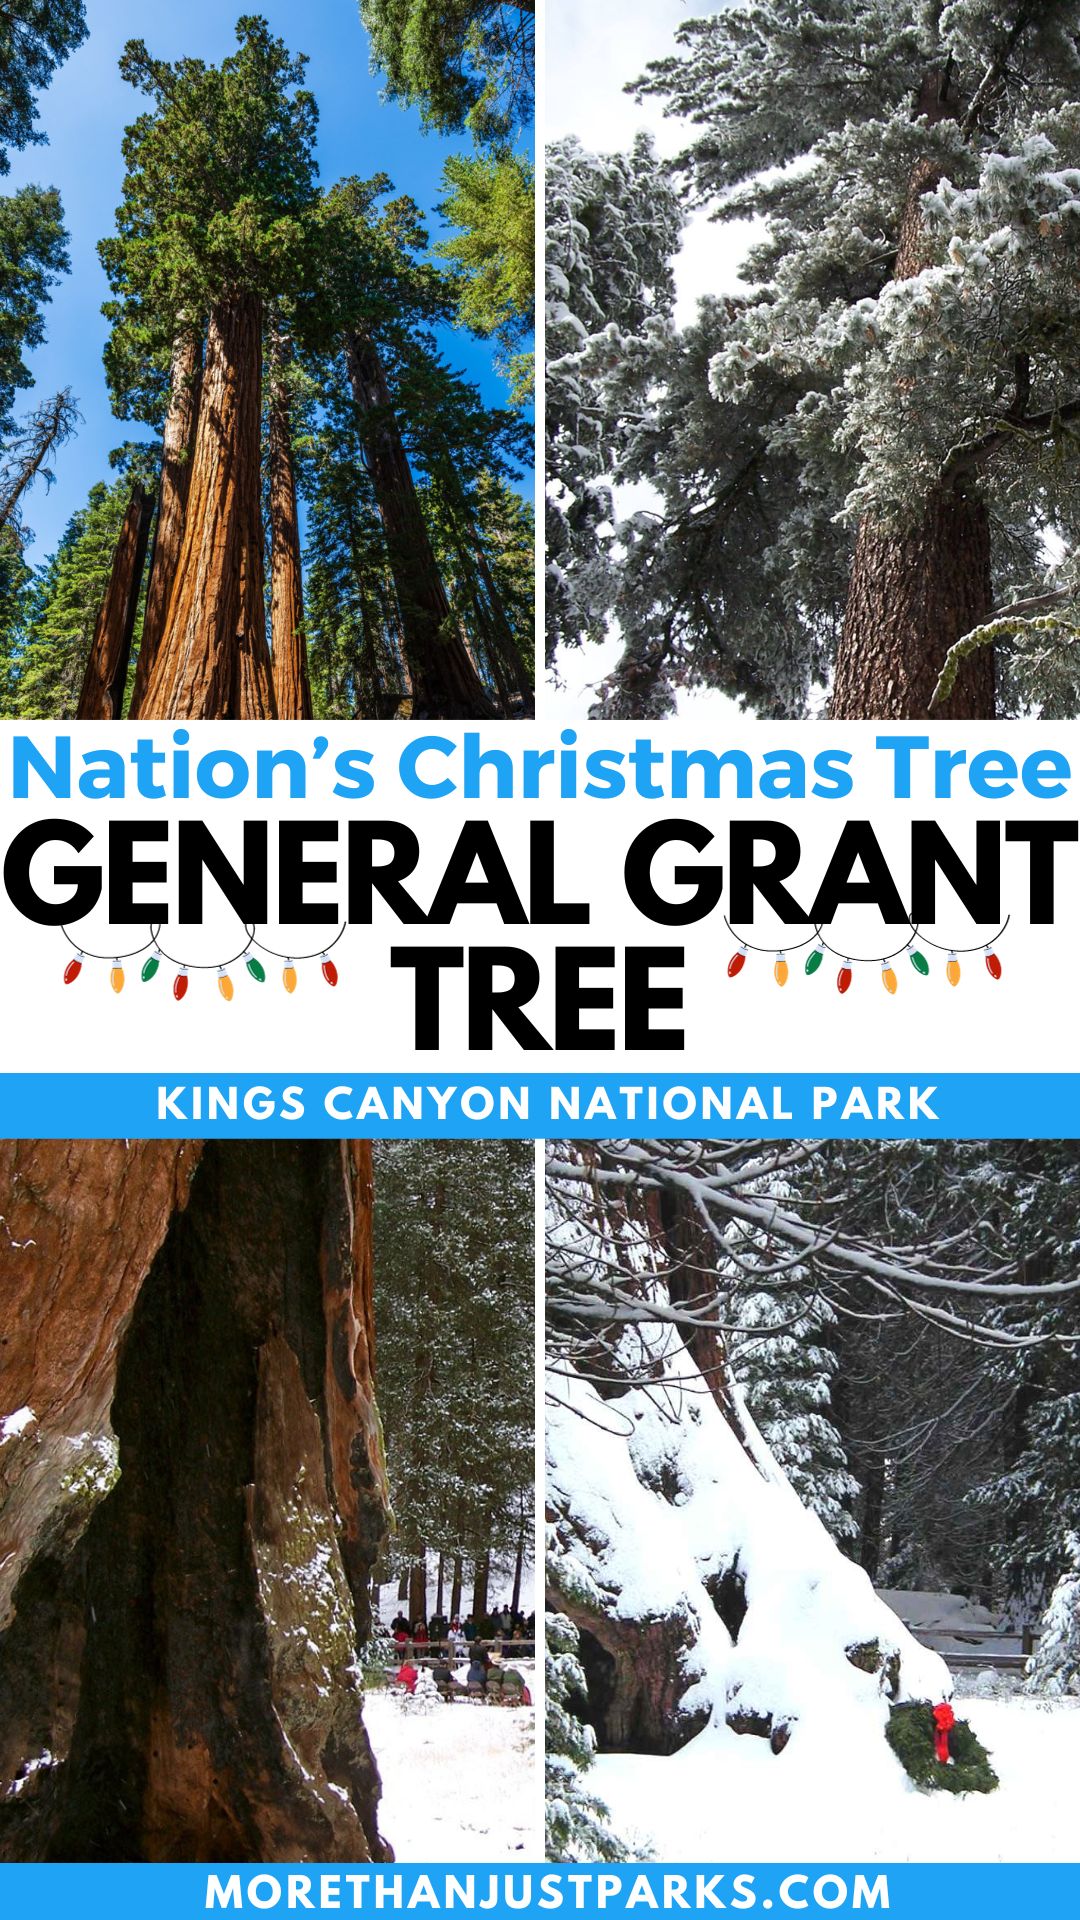 Graphic reads "The Nation's Christmas Tree General Grant Tree Kings Canyon National Park."